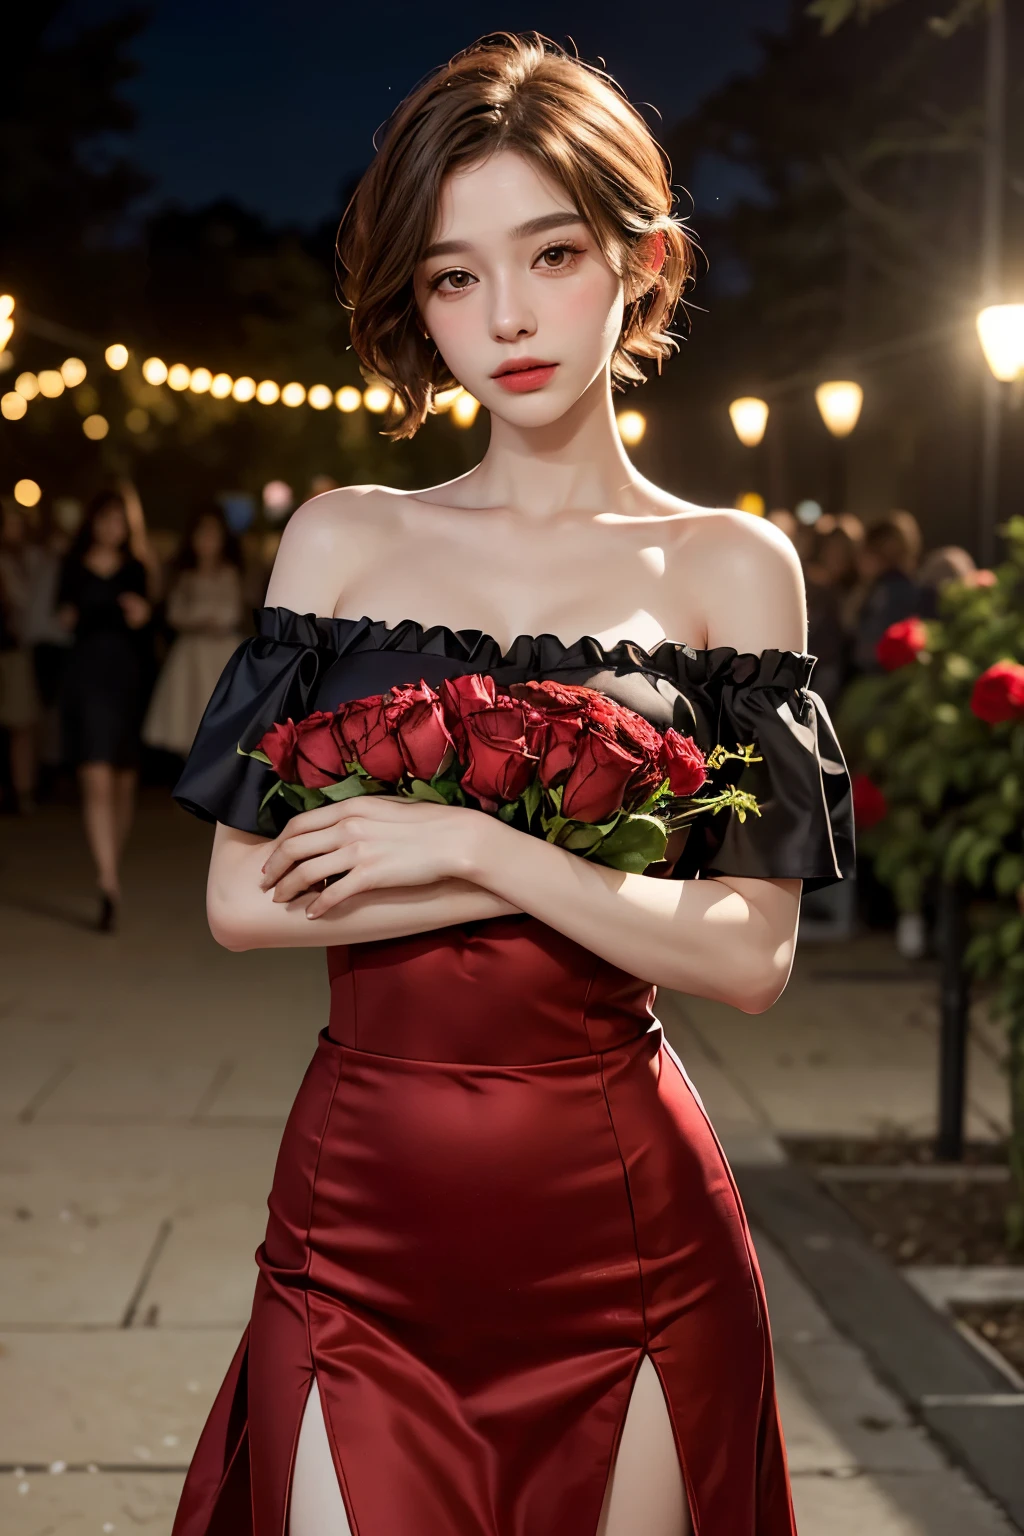 Red long skirt dress, Highest quality, masterpiece, Ultra-high resolution, (Realistic:1.4), RAW Photos, One Girl, Off the shoulder, Red carpet, ((holding a bunch of roses)), Deep Shadow, Moderate, short hair, 20-year-old,Cute face,Tight shirt, Cowboy Shot, Spotlight, celebration